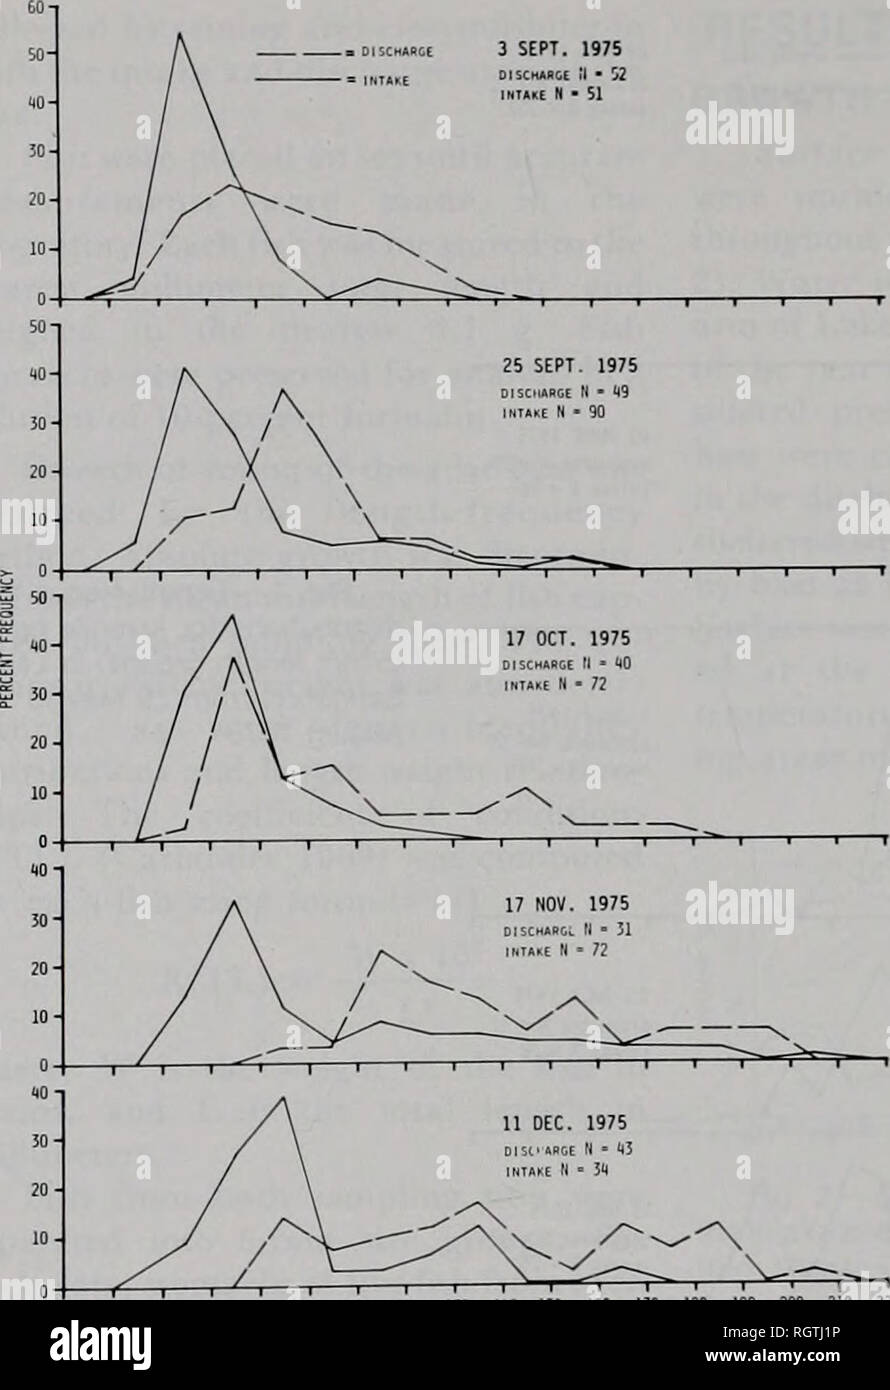 . Bulletin. Natural history; Natural history. 524 Illinois Natural History Survey Bulletin Vol. 32, Art. 4 a DlSCxARoe 3 SEPT. 1975 1 n*kc INTklE N - 51. Fig. 4.—Length-frequency distributions for juvenile bass (10-mm length groups) in Lake Sangchris from 3 September to 11 December 1975. lOKL LEIIGH («f Studies of fish populations in ponds and small lakes actively managed for superior production, which probably raised the average size of bass examined. For this reason, a more conservative estimate of first-year growth for Illinois largemouth bass may be more representative. The combined averag Stock Photo